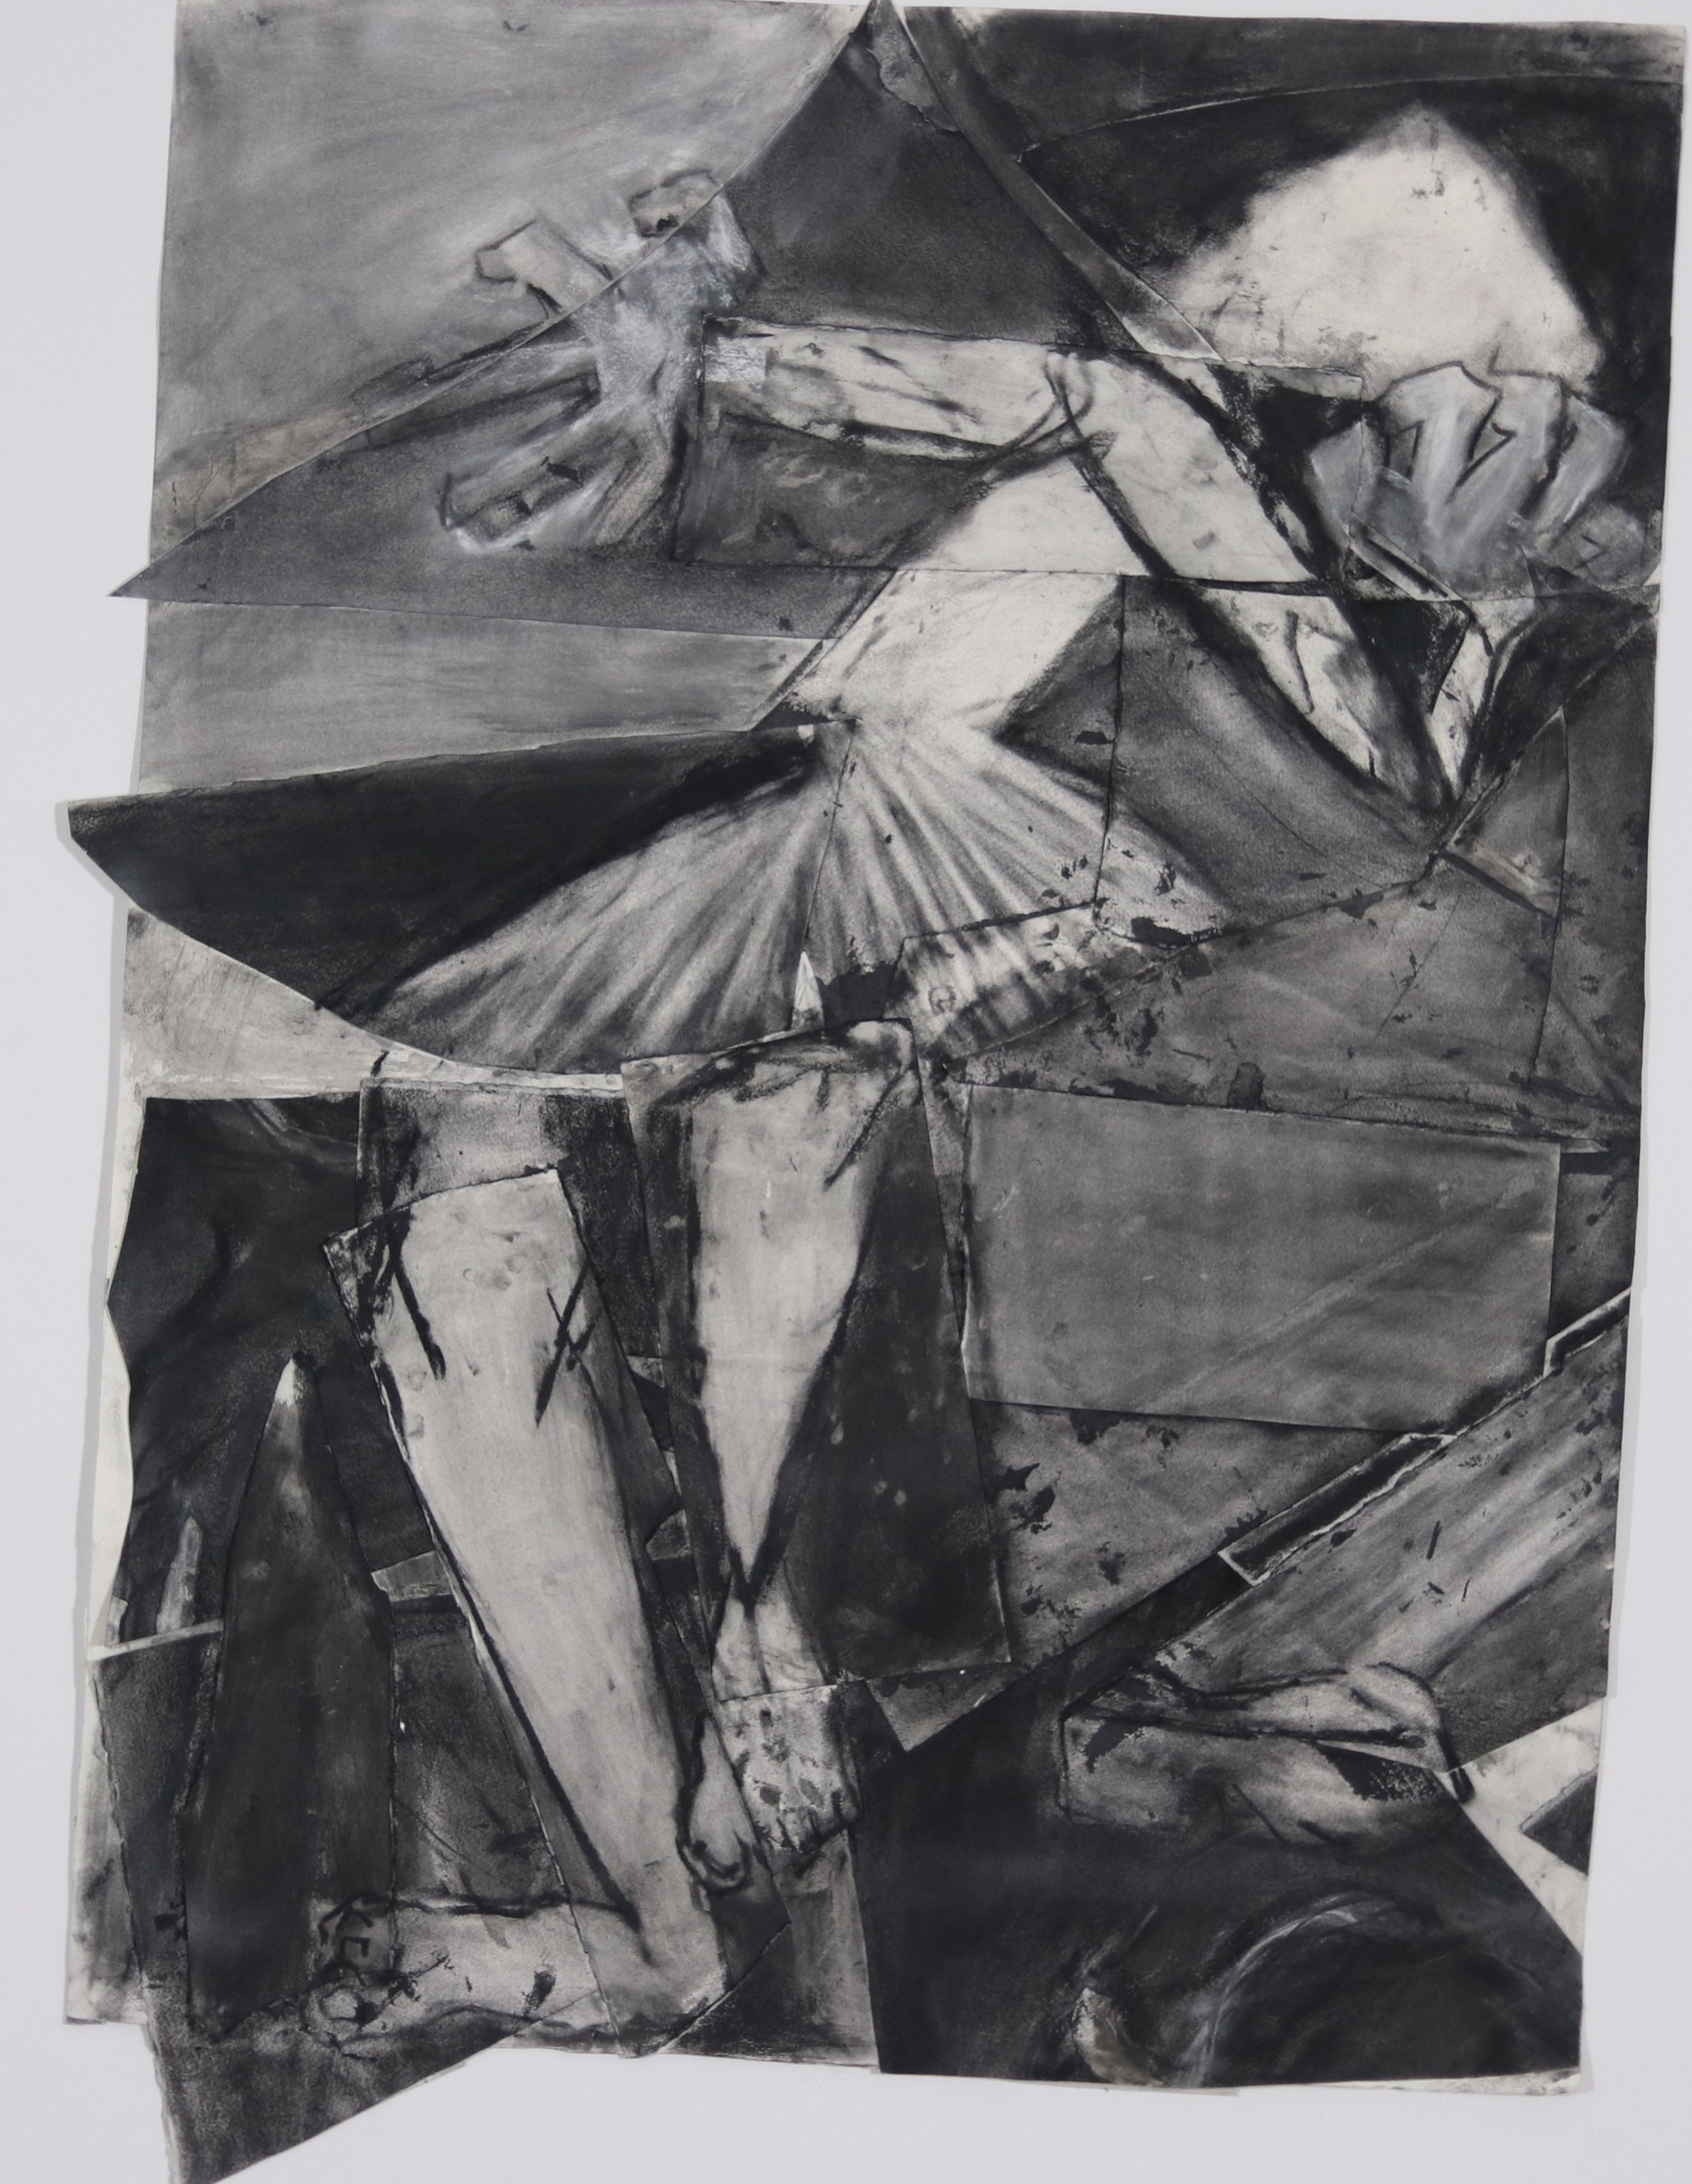  Freedom  30 3/4 x 43 3/4  Charcoal, Collage on Paper 